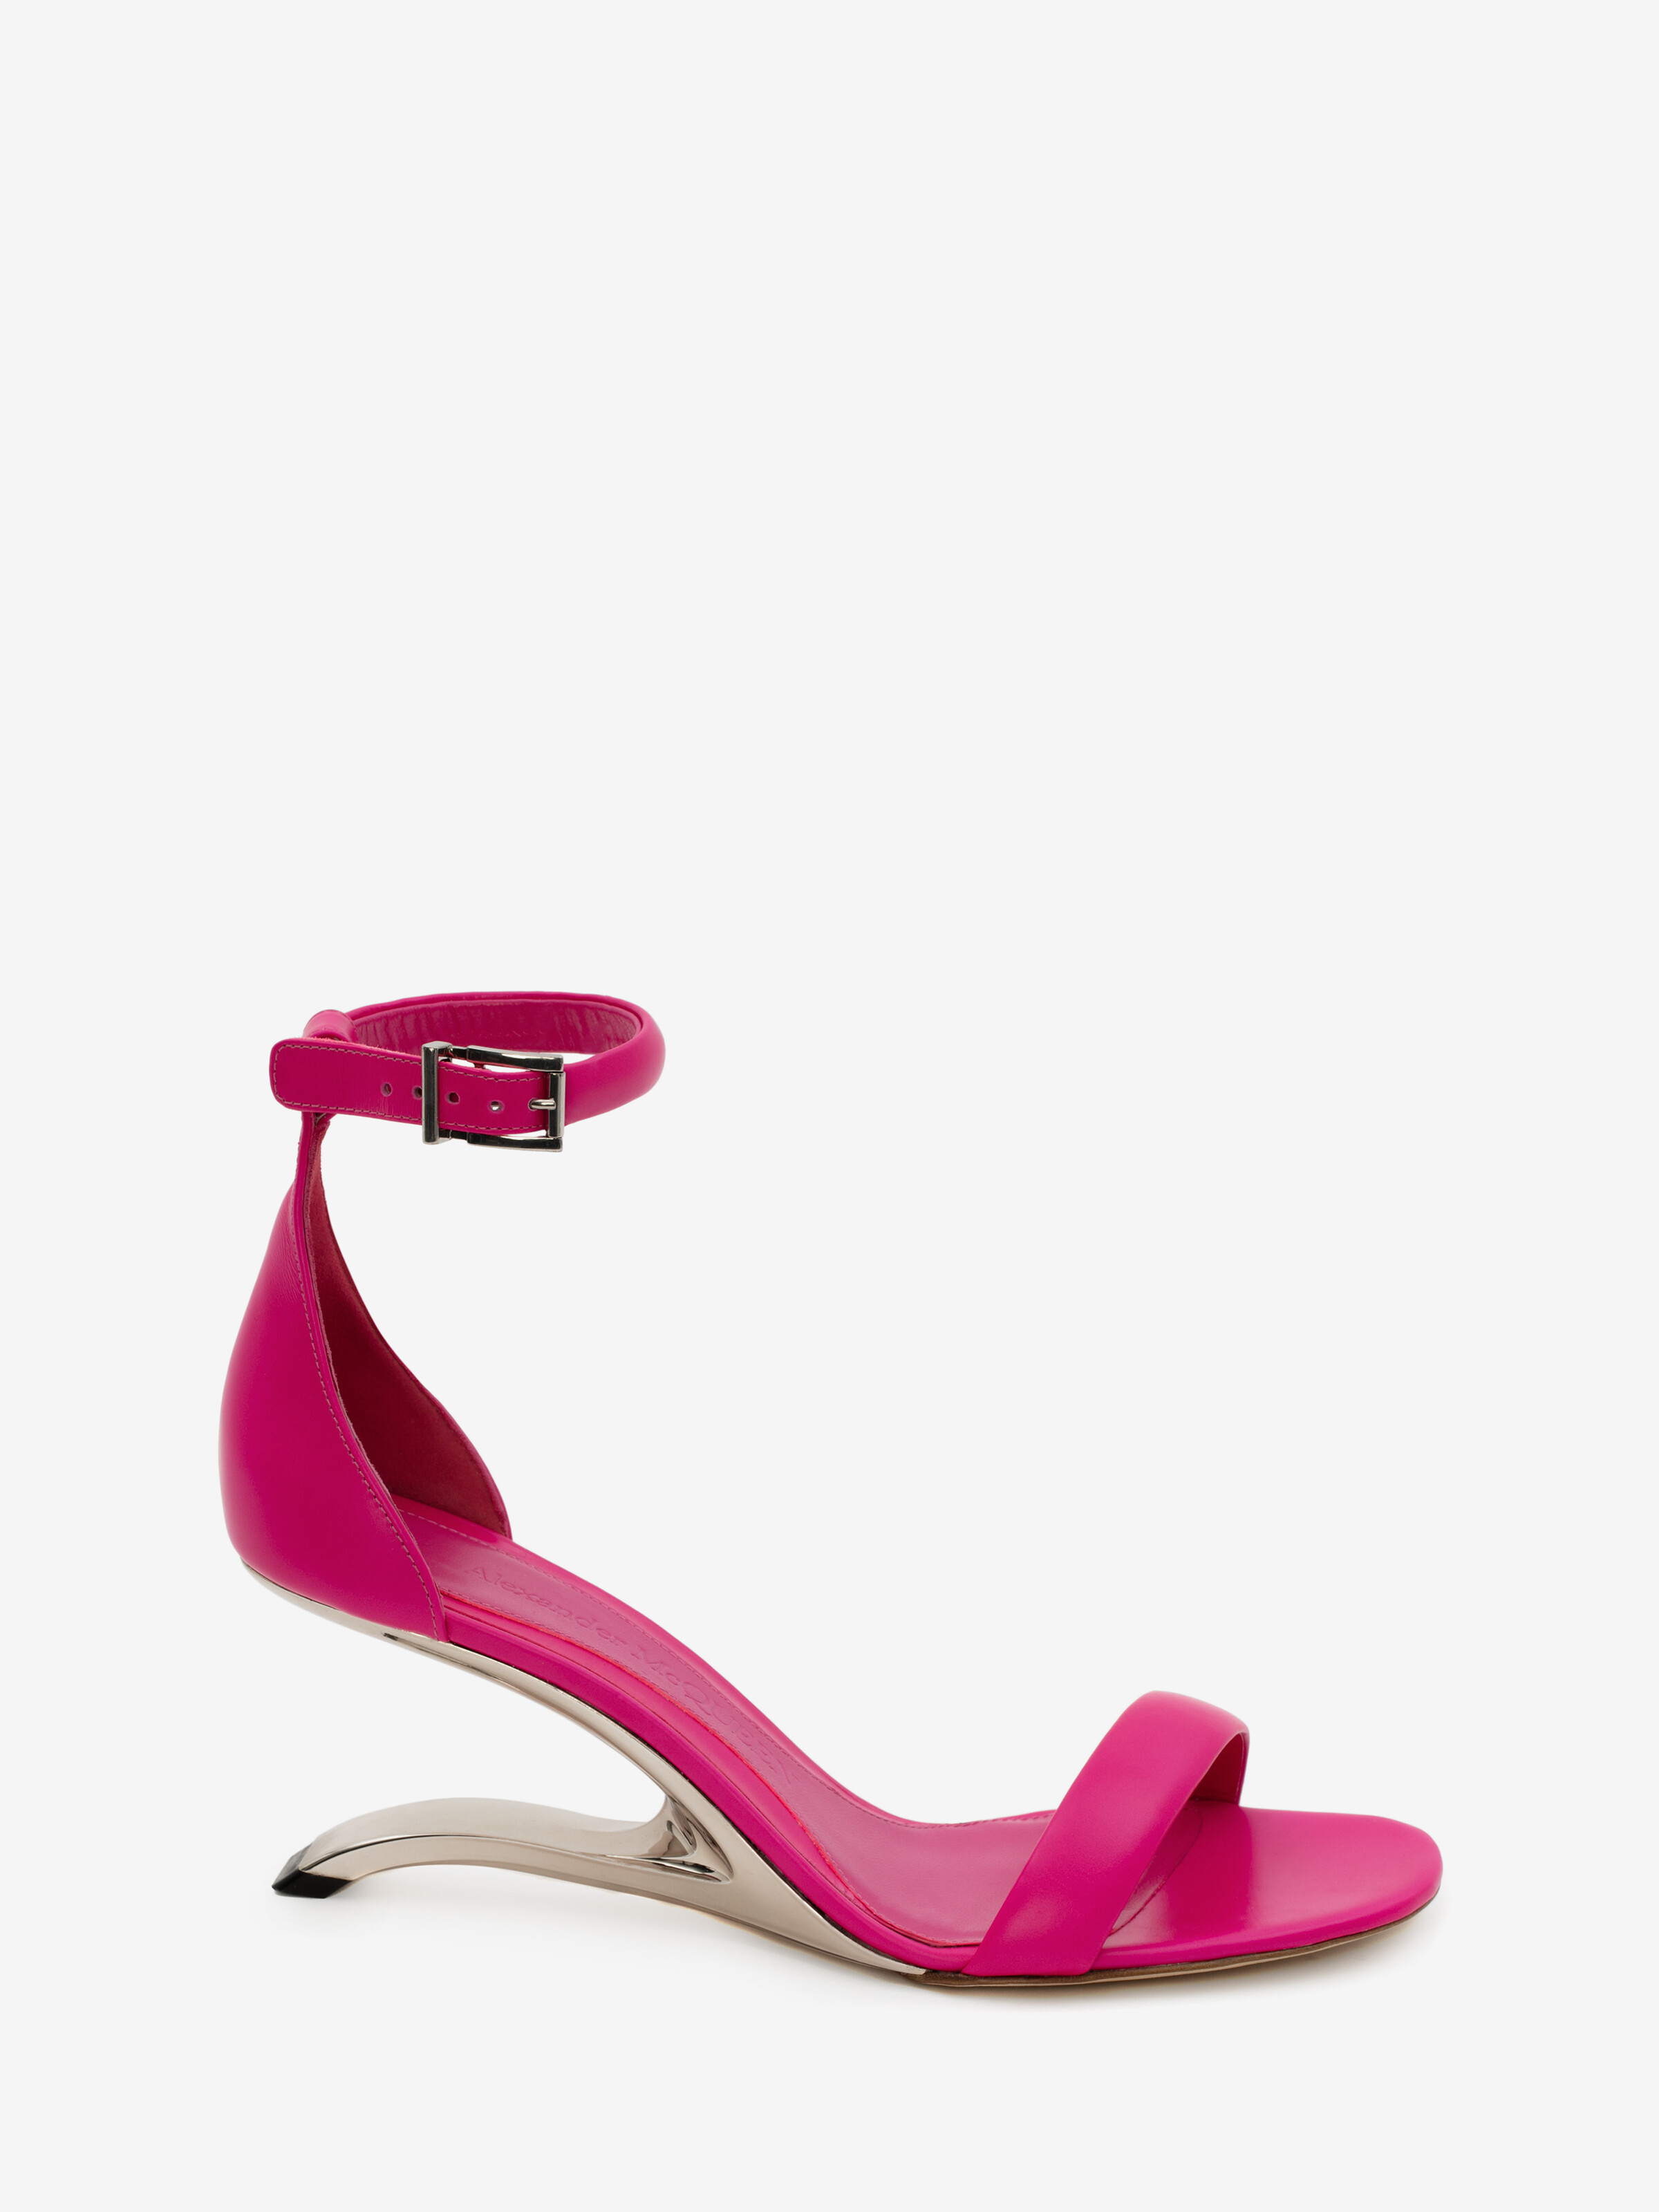 Alexander Mcqueen Arc Leather Sandal In Bobby Pink